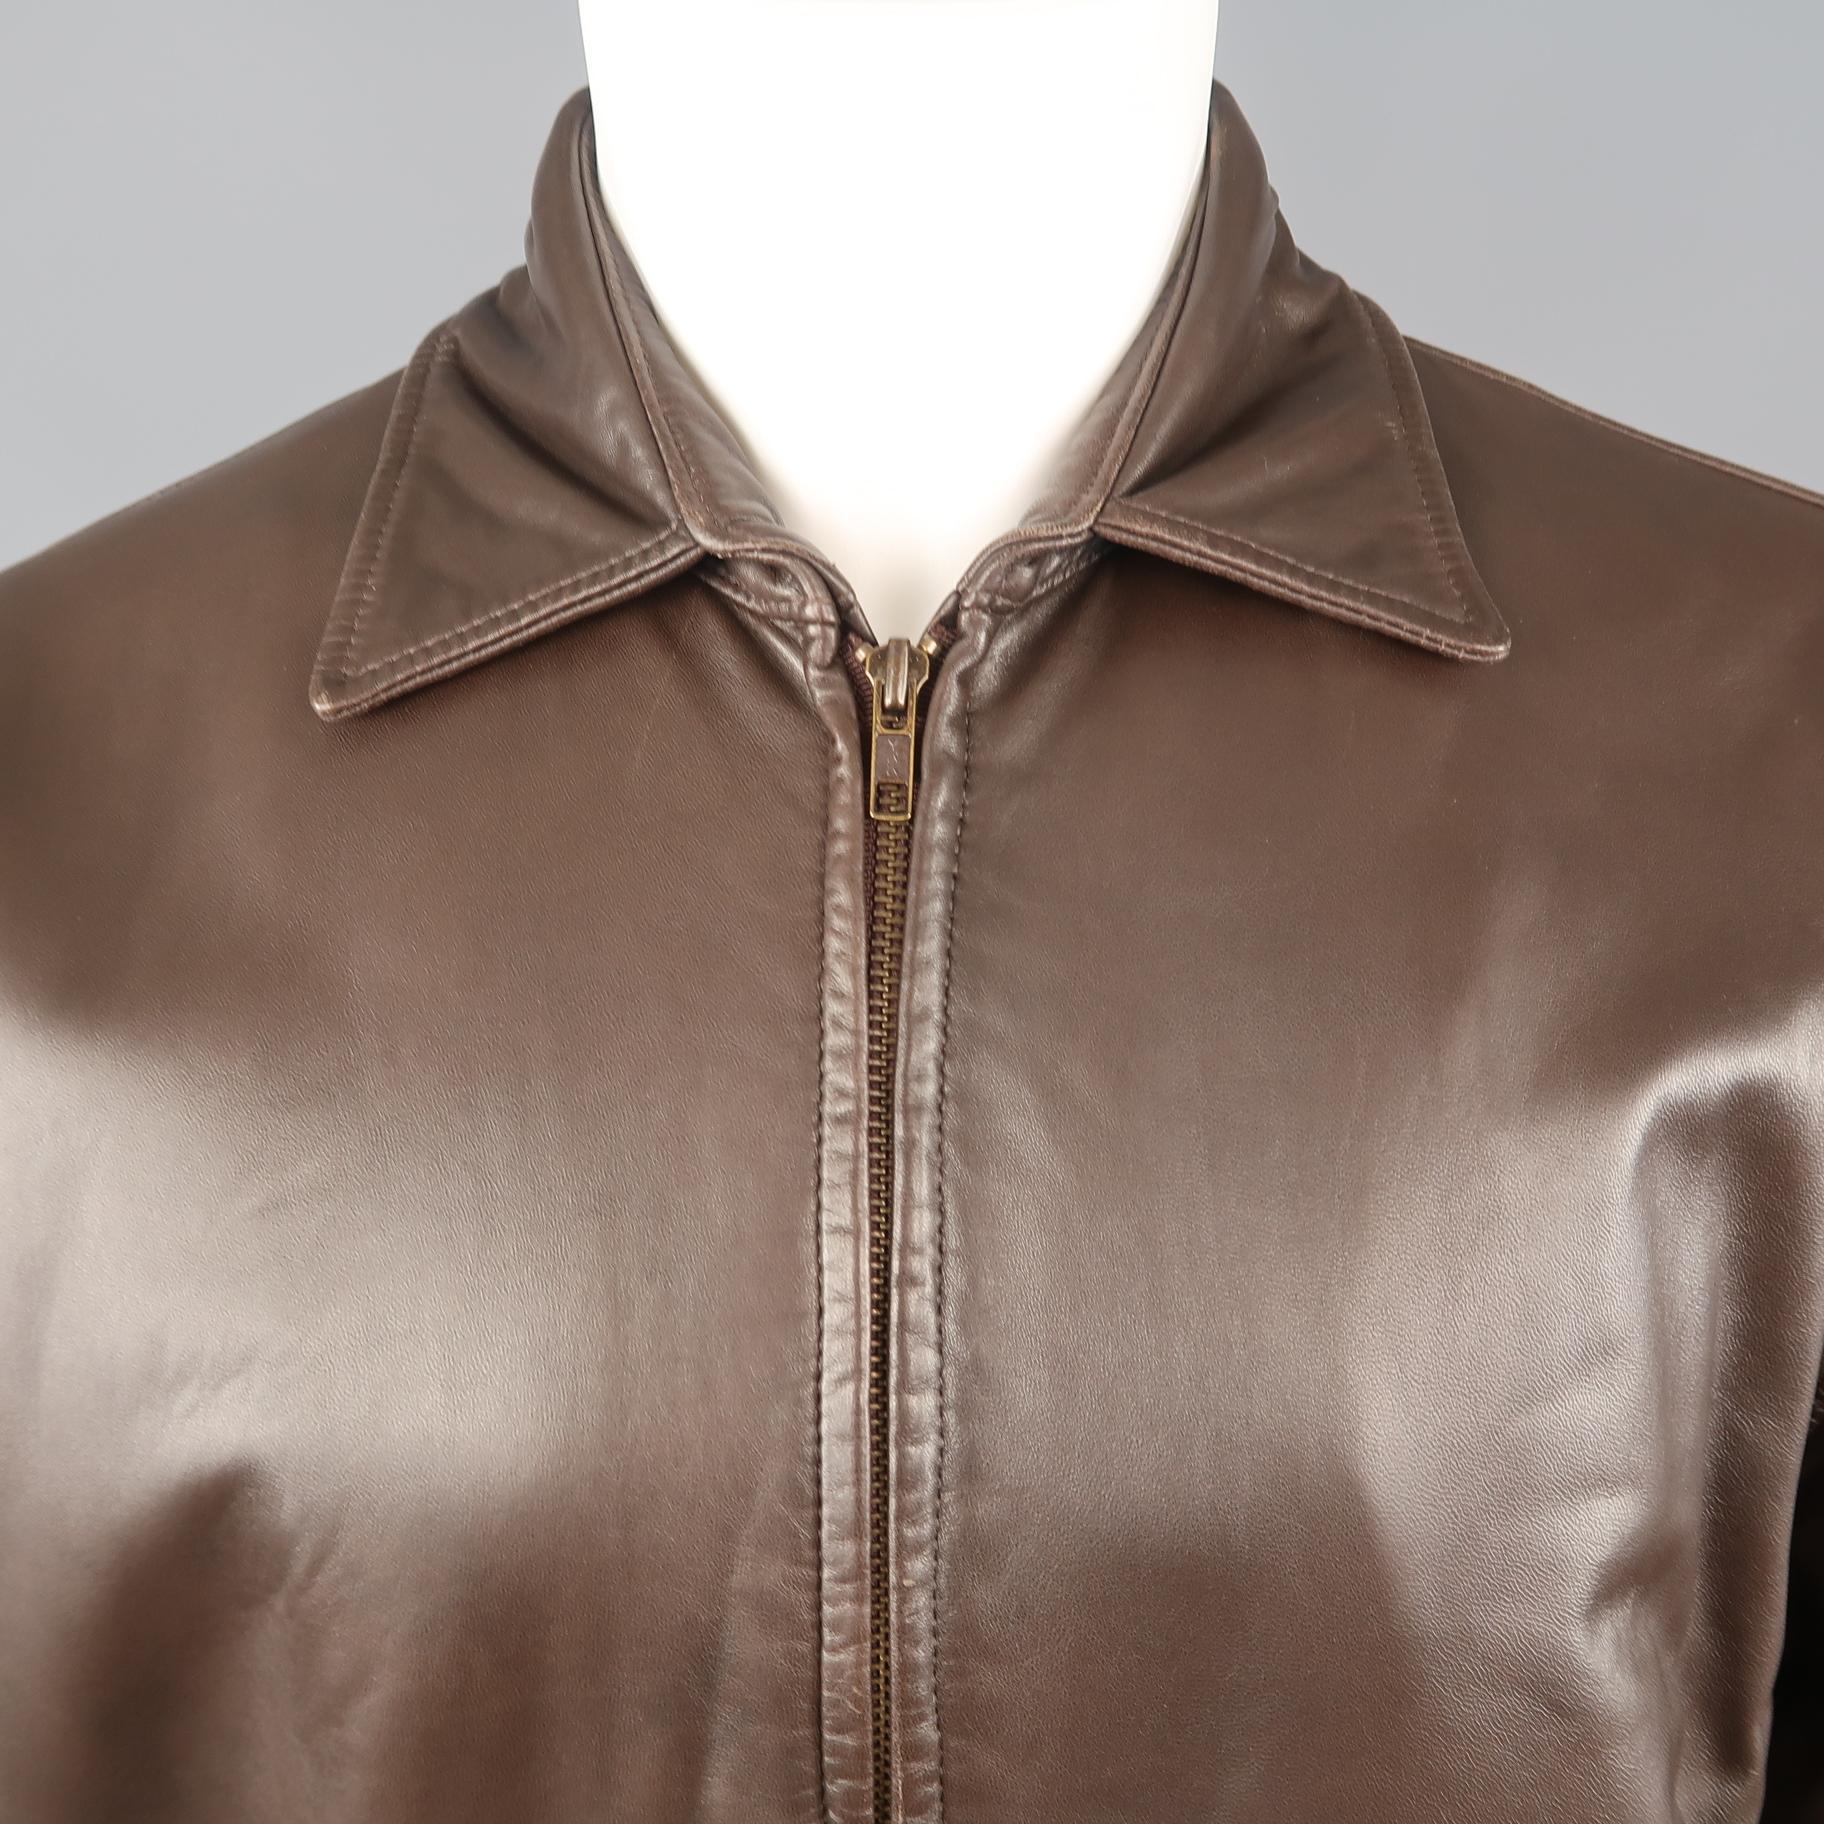 GOLDEN BEAR bomber jacket comes in smooth chocolate brown leather with a pointed collar, elastic waist, zip up front, and slanted pockets. Made in USA.
 
Excellent Pre-Owned Condition.
Marked: S
 
Measurements:
 
Shoulder: 20 in.
Chest: 46